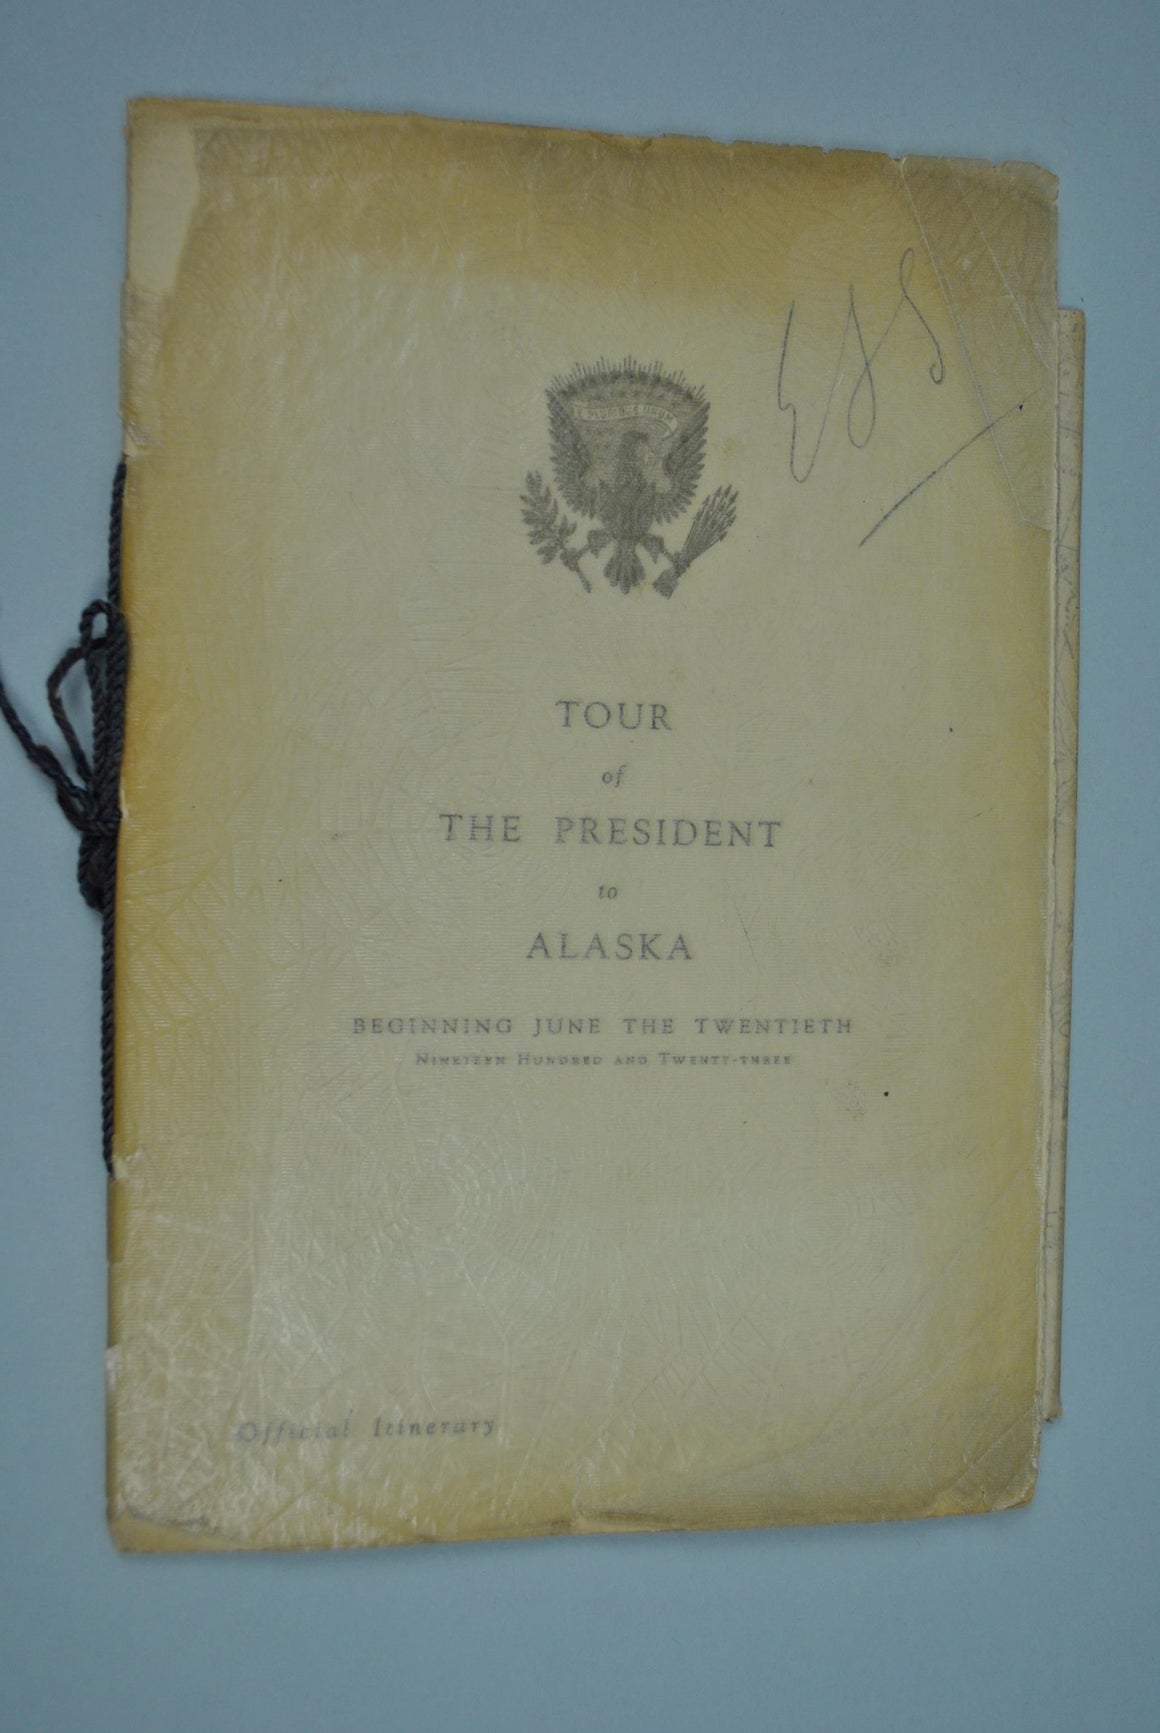 Harding Tour of the President to Alaska Official Itinerary 1923